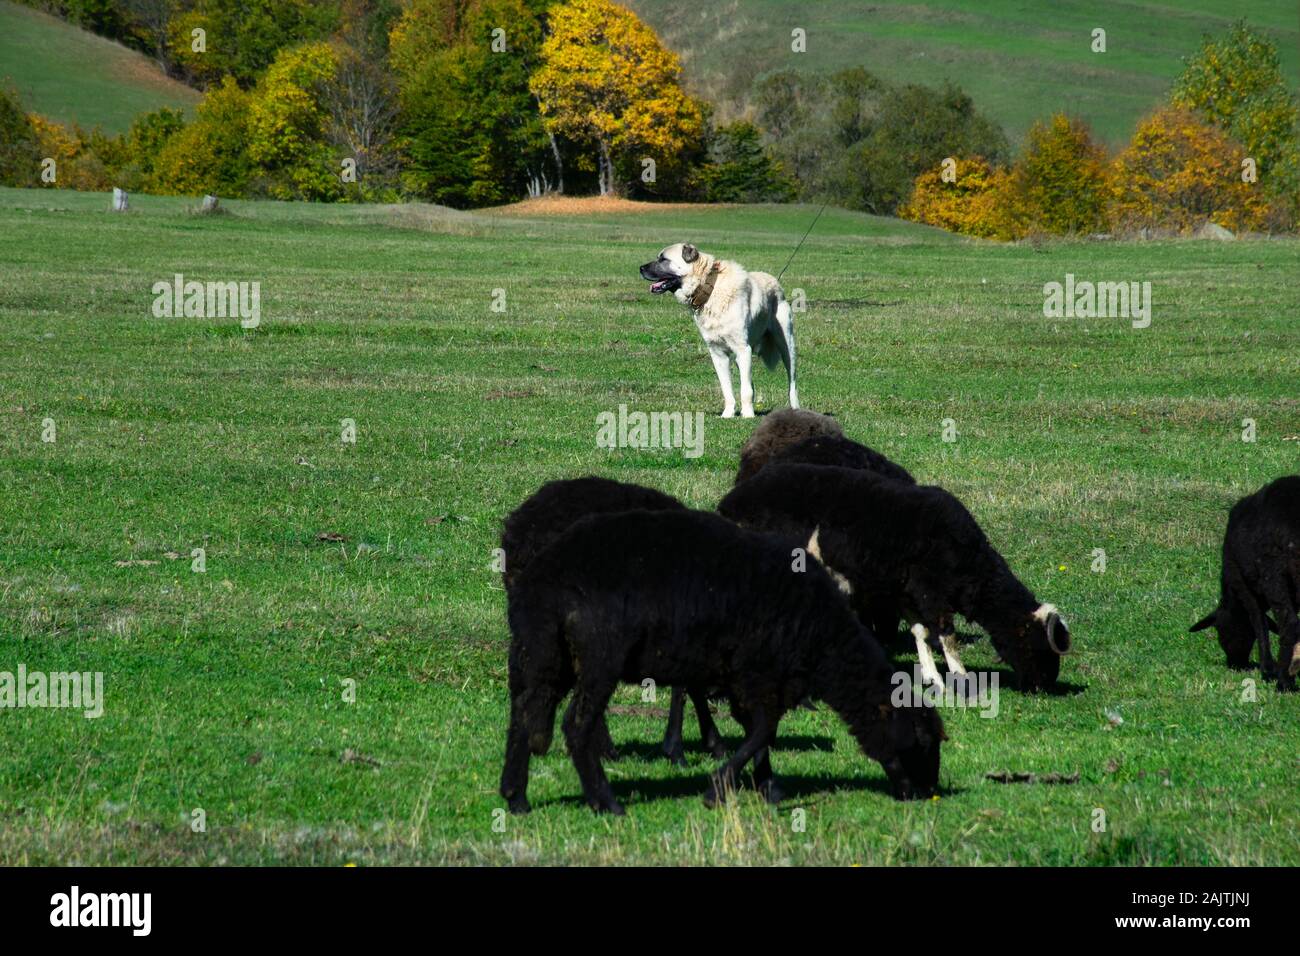 An Turkish Kangal dog works the sheep in the plateau Stock Photo